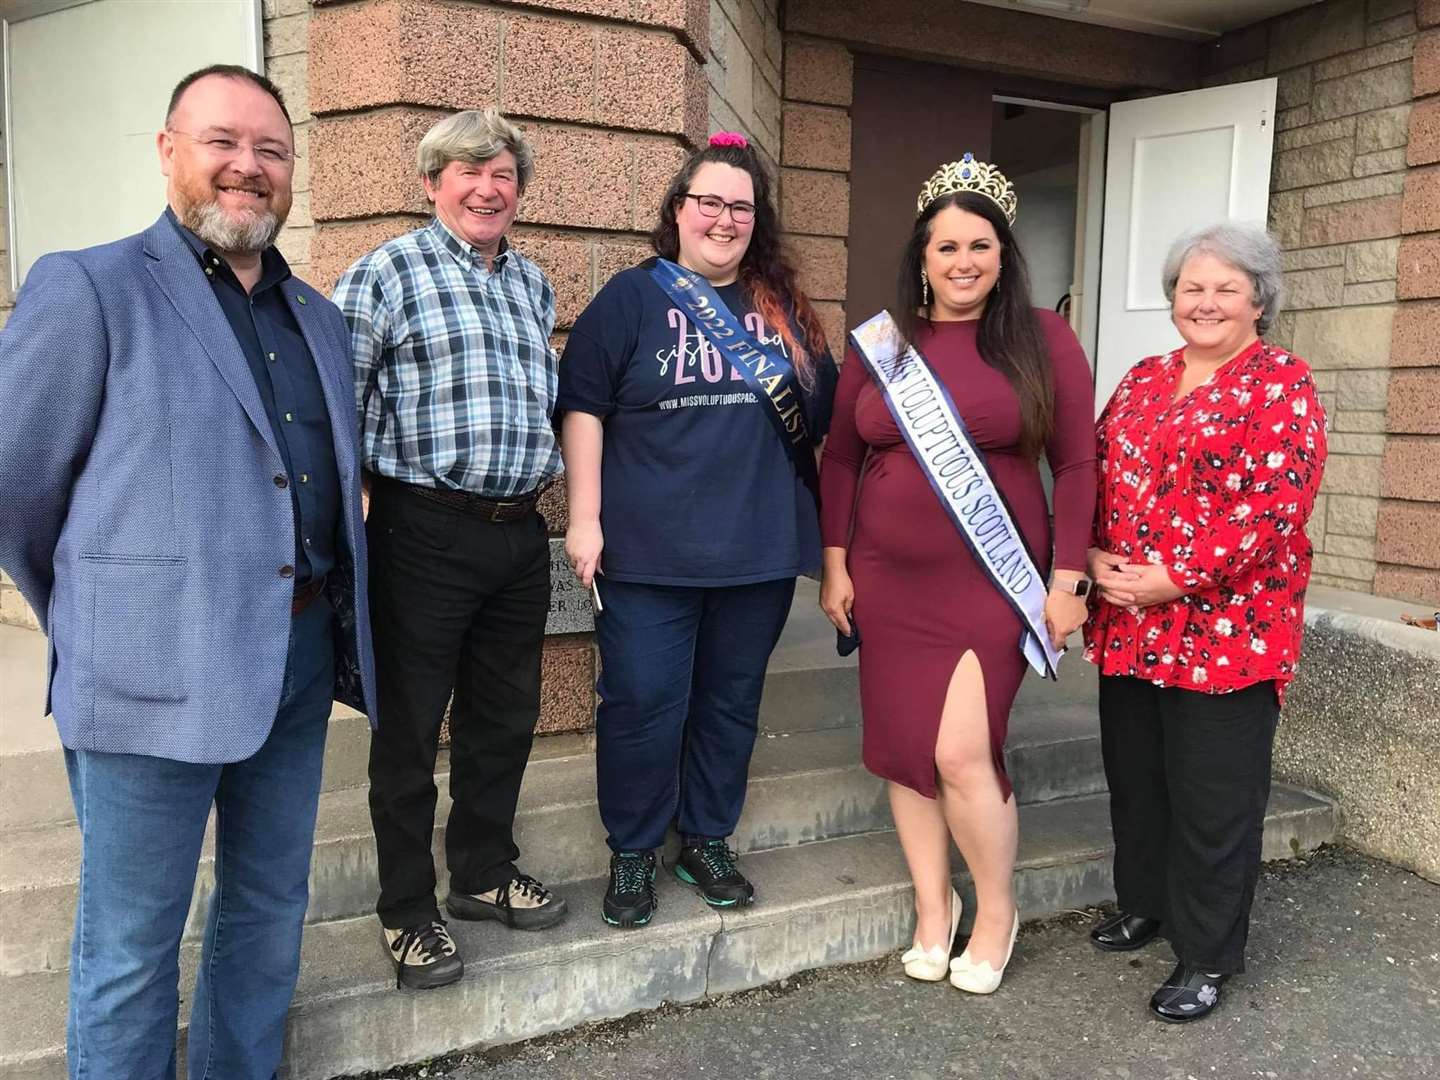 Event organiser Kirsty Brown (centre) was joined by (from left) MP David Duguid, councillor Ian Taylor, current Miss Voluptuous Scotland Siobhan Gardner and councillor Anne Stirling.